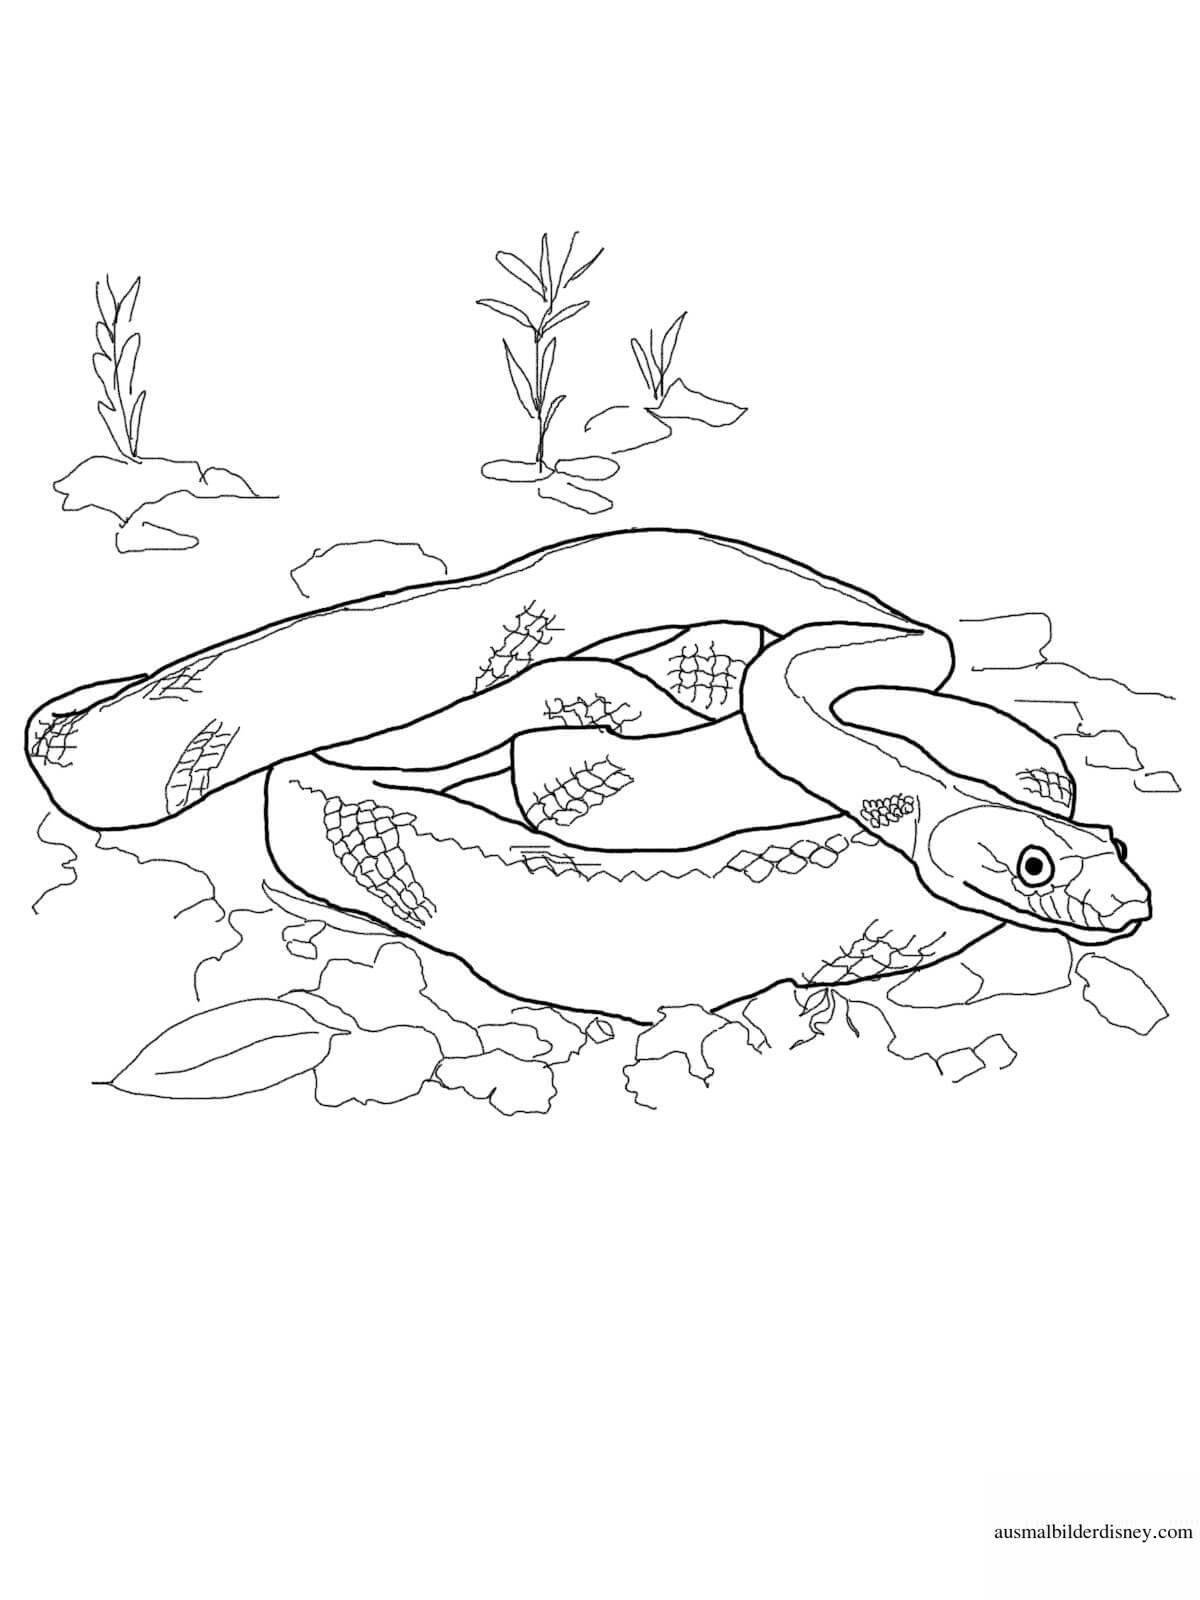 Exquisite blue snake coloring page